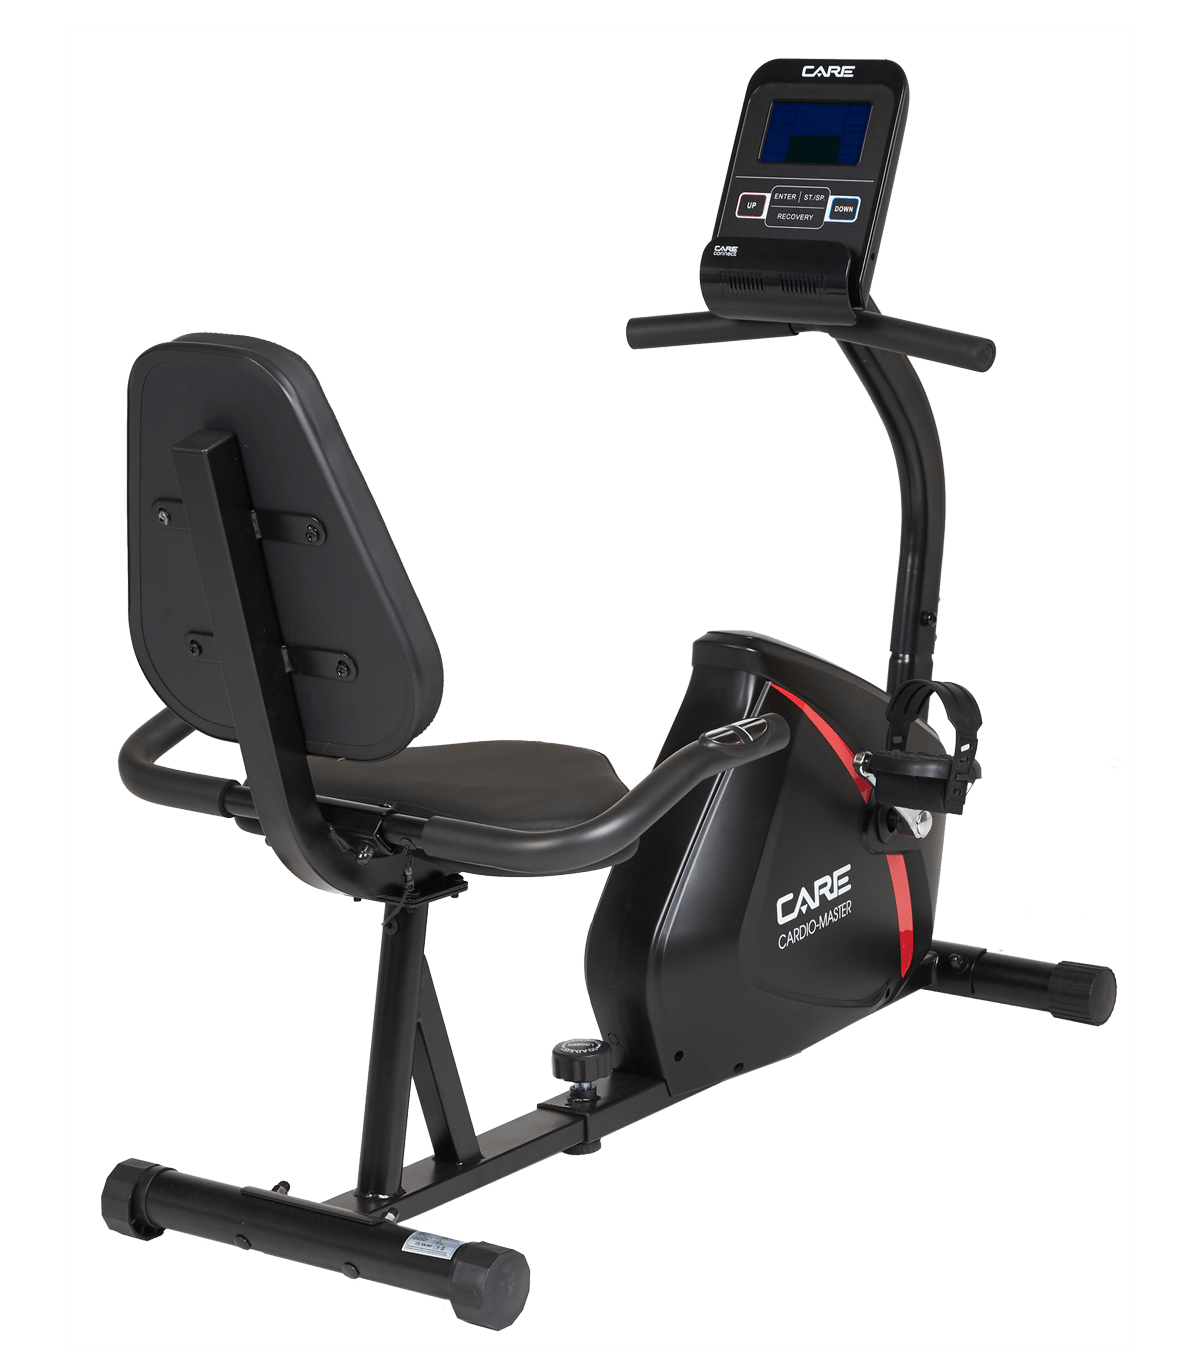 CARE Velo assis Cardio-Master 21 programmes CARE CONNECT